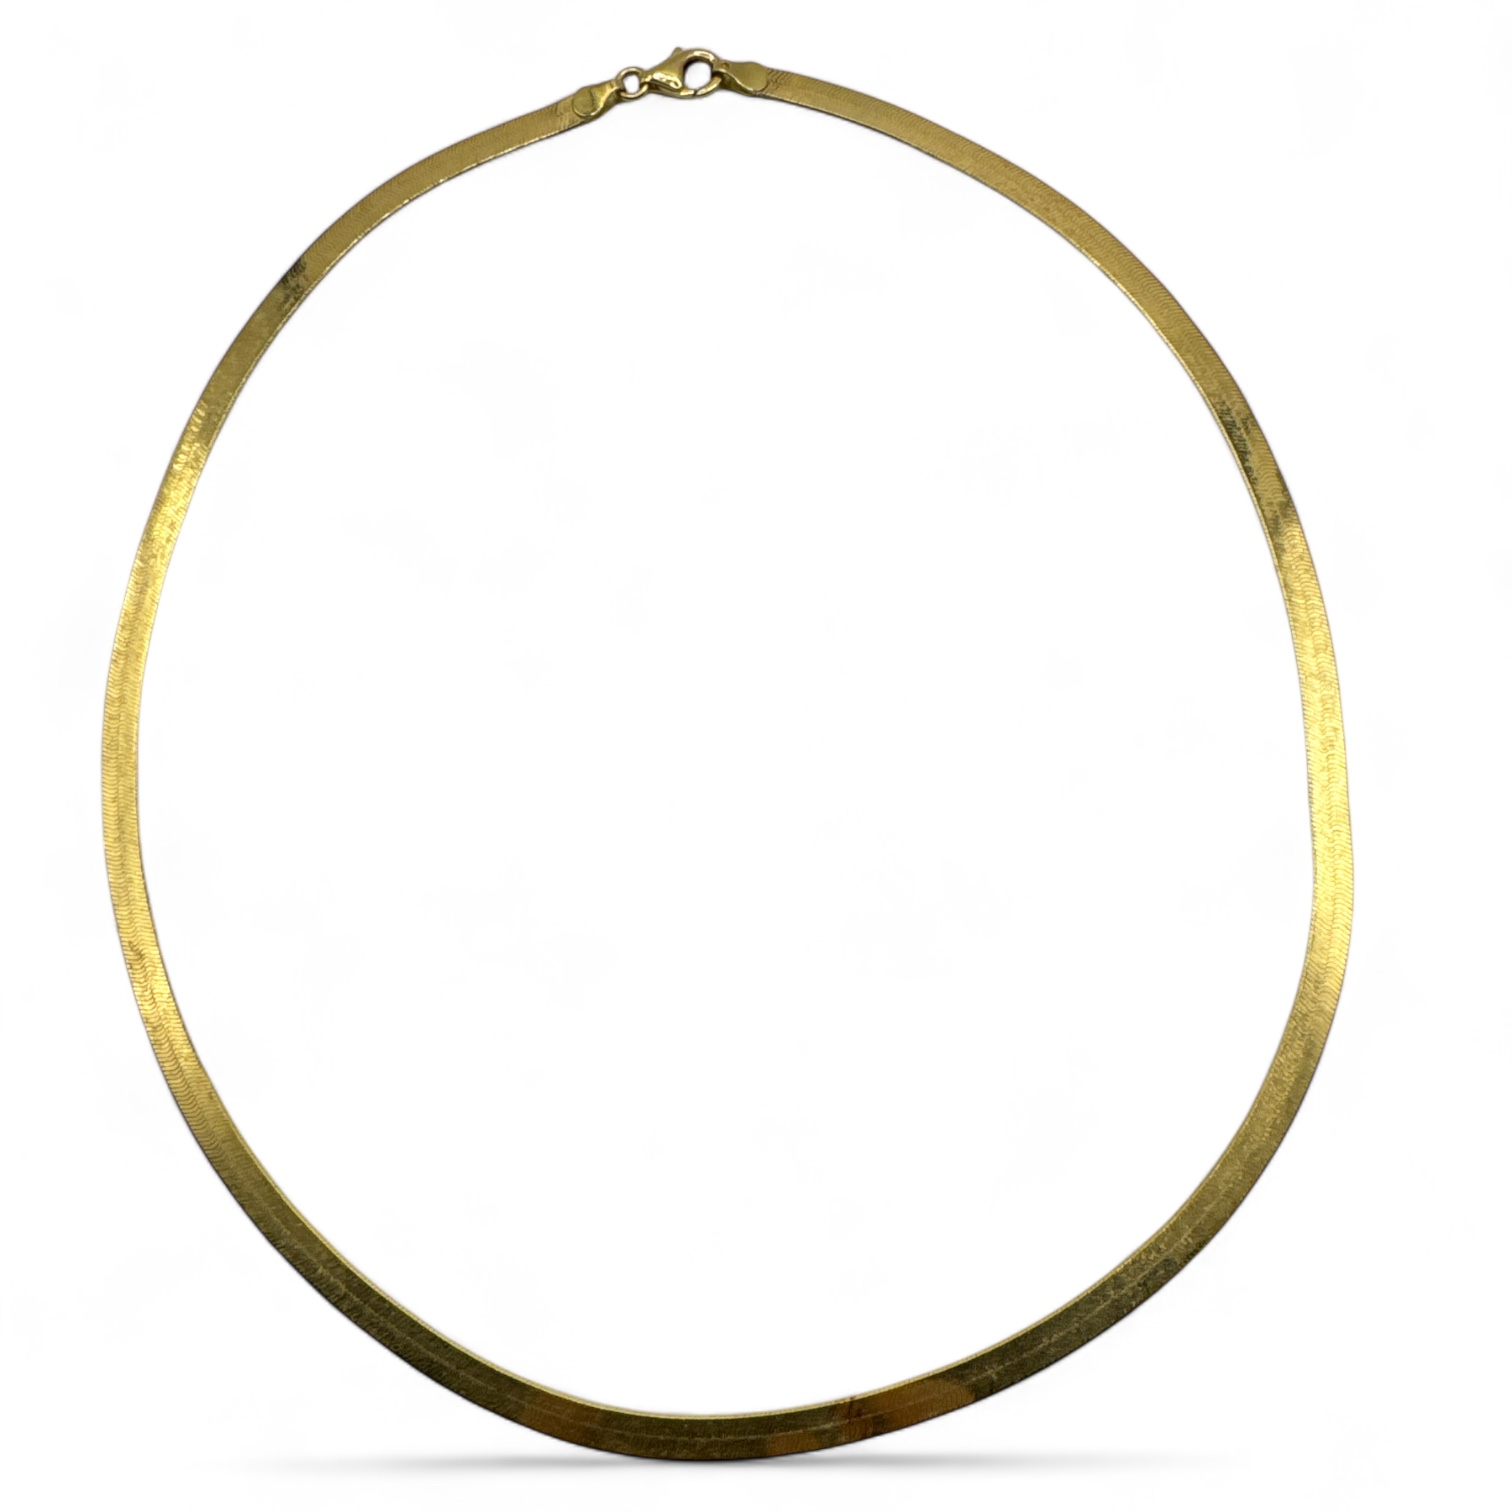 A Portuguese 800 yellow gold ribbon chain necklace. With a lobster clasp. Featuring the Porto